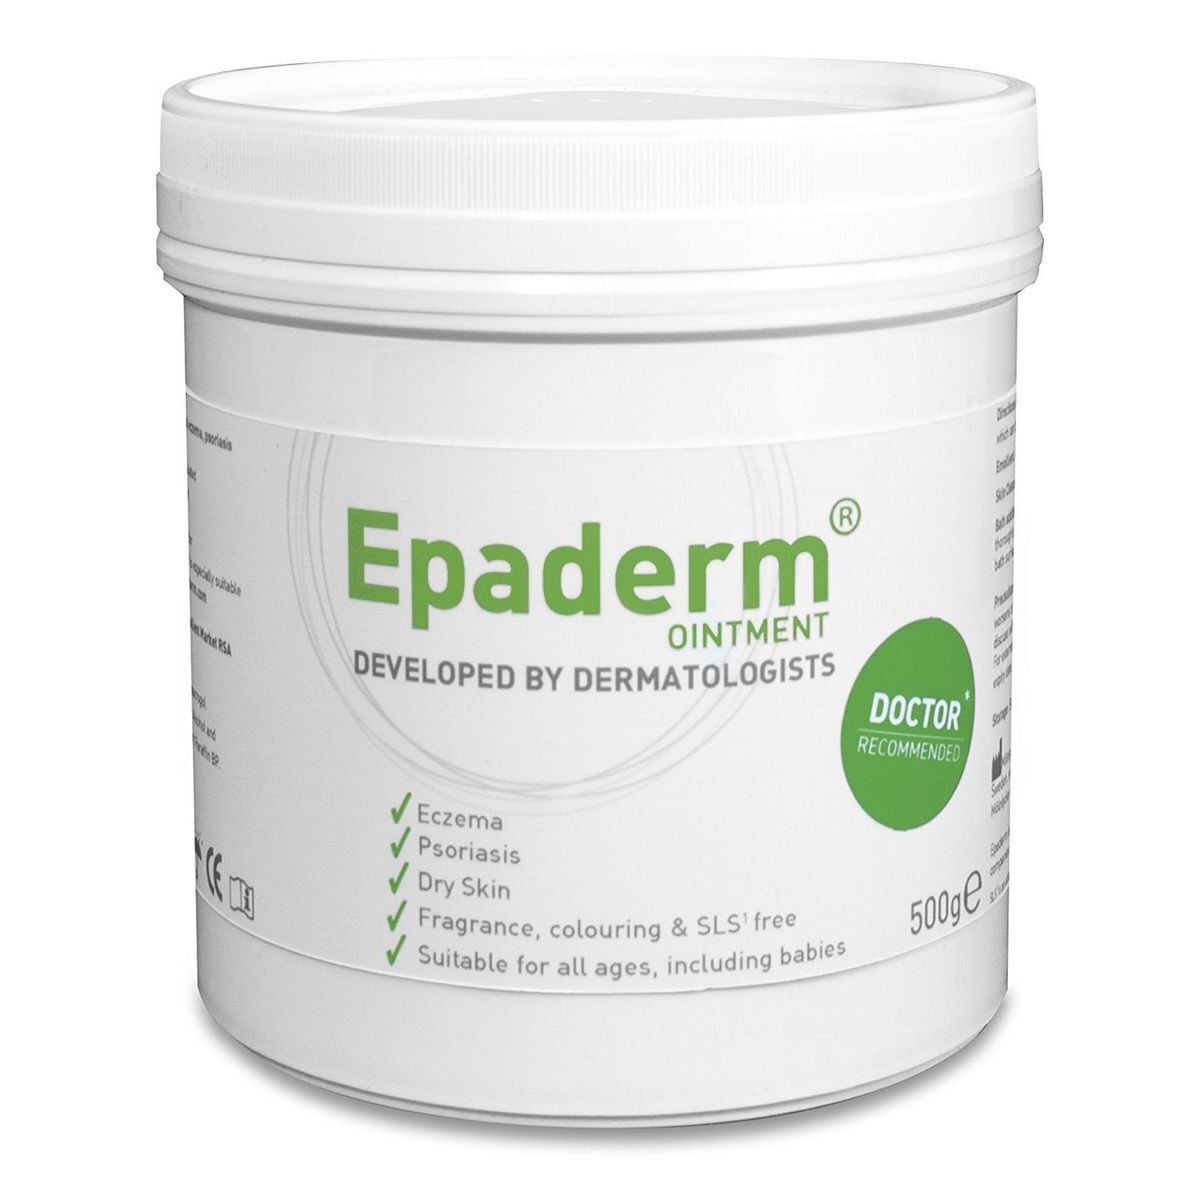 Picture of 2Seeds 224275375134 500g 3-1 Specifically Epaderm Ointment Tub Moisturizer Dry Skin Condition